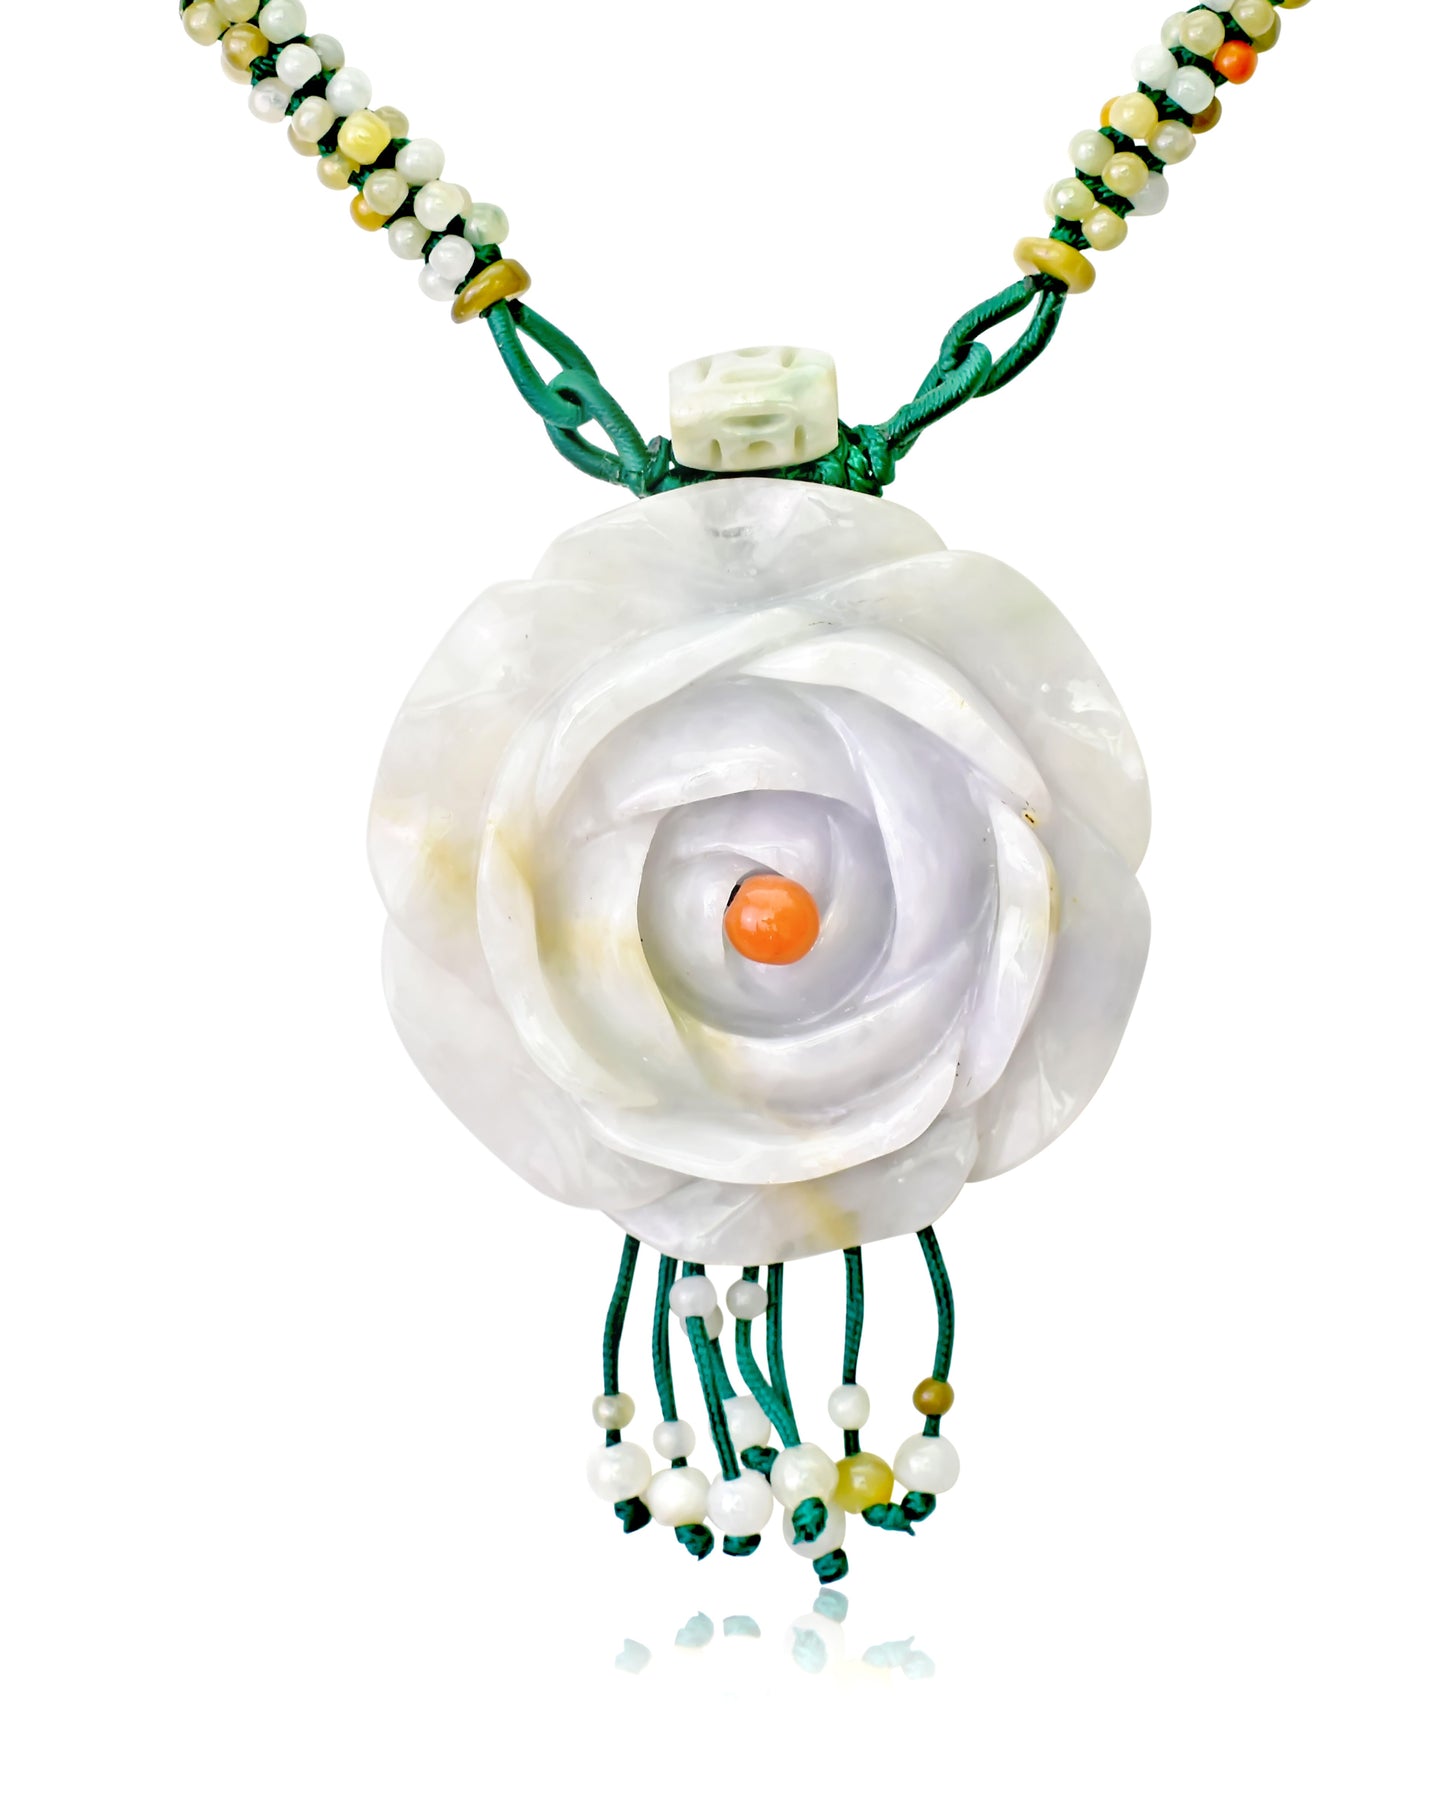 Make Any Outfit Romantic with a Rose Blossom 100 beads Flower Necklace